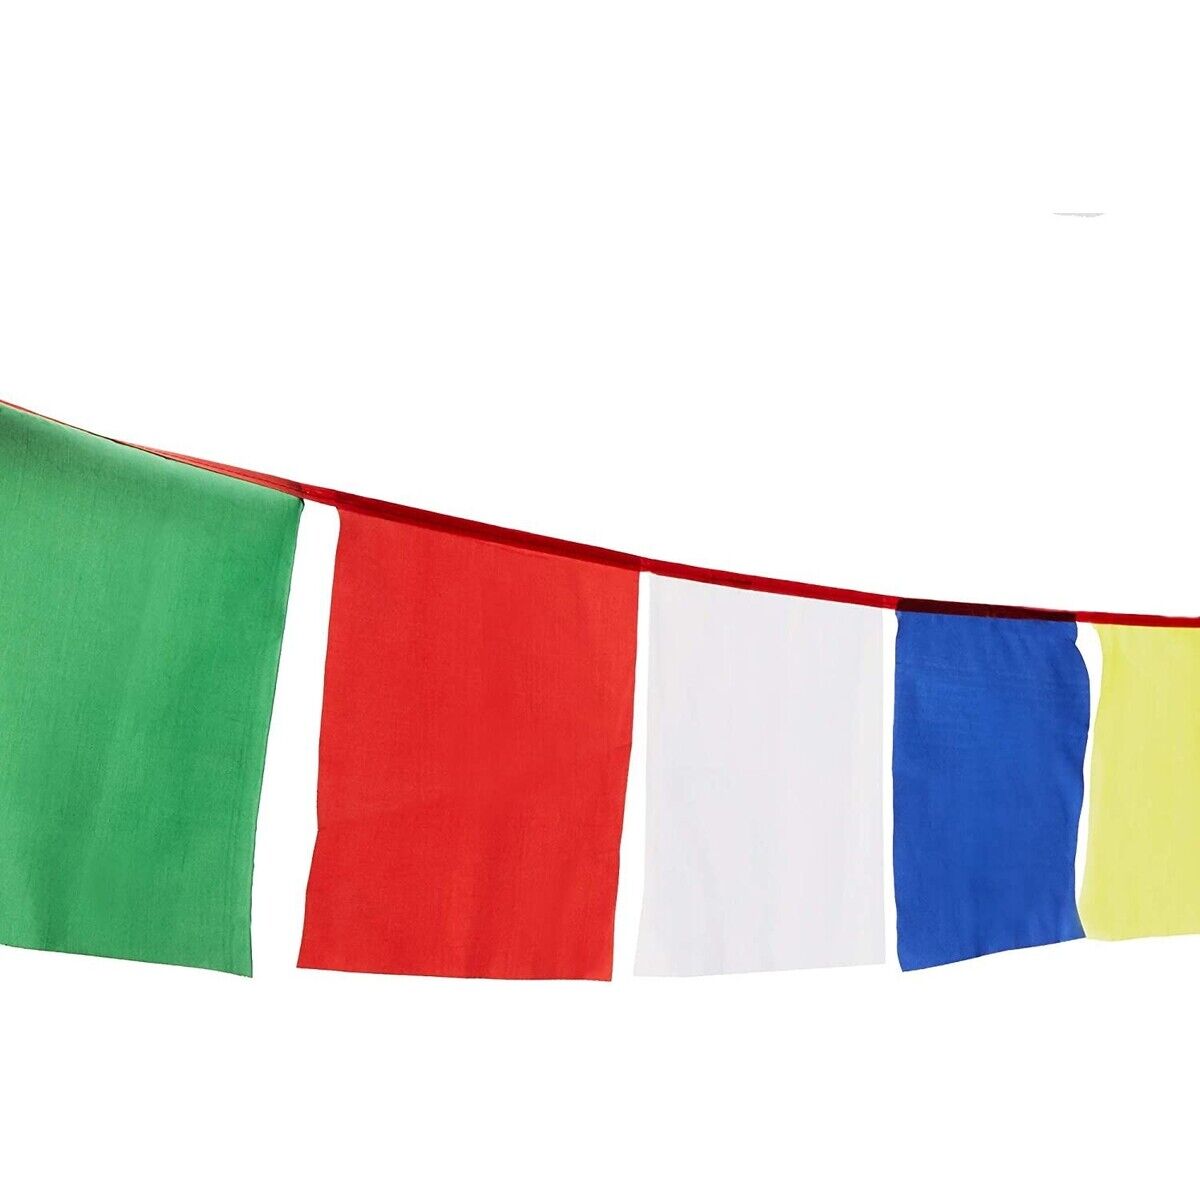 25 Tibetan Prayer Flags, Traditional Design with 5 Element Colors, 9.5 x 9.5 In